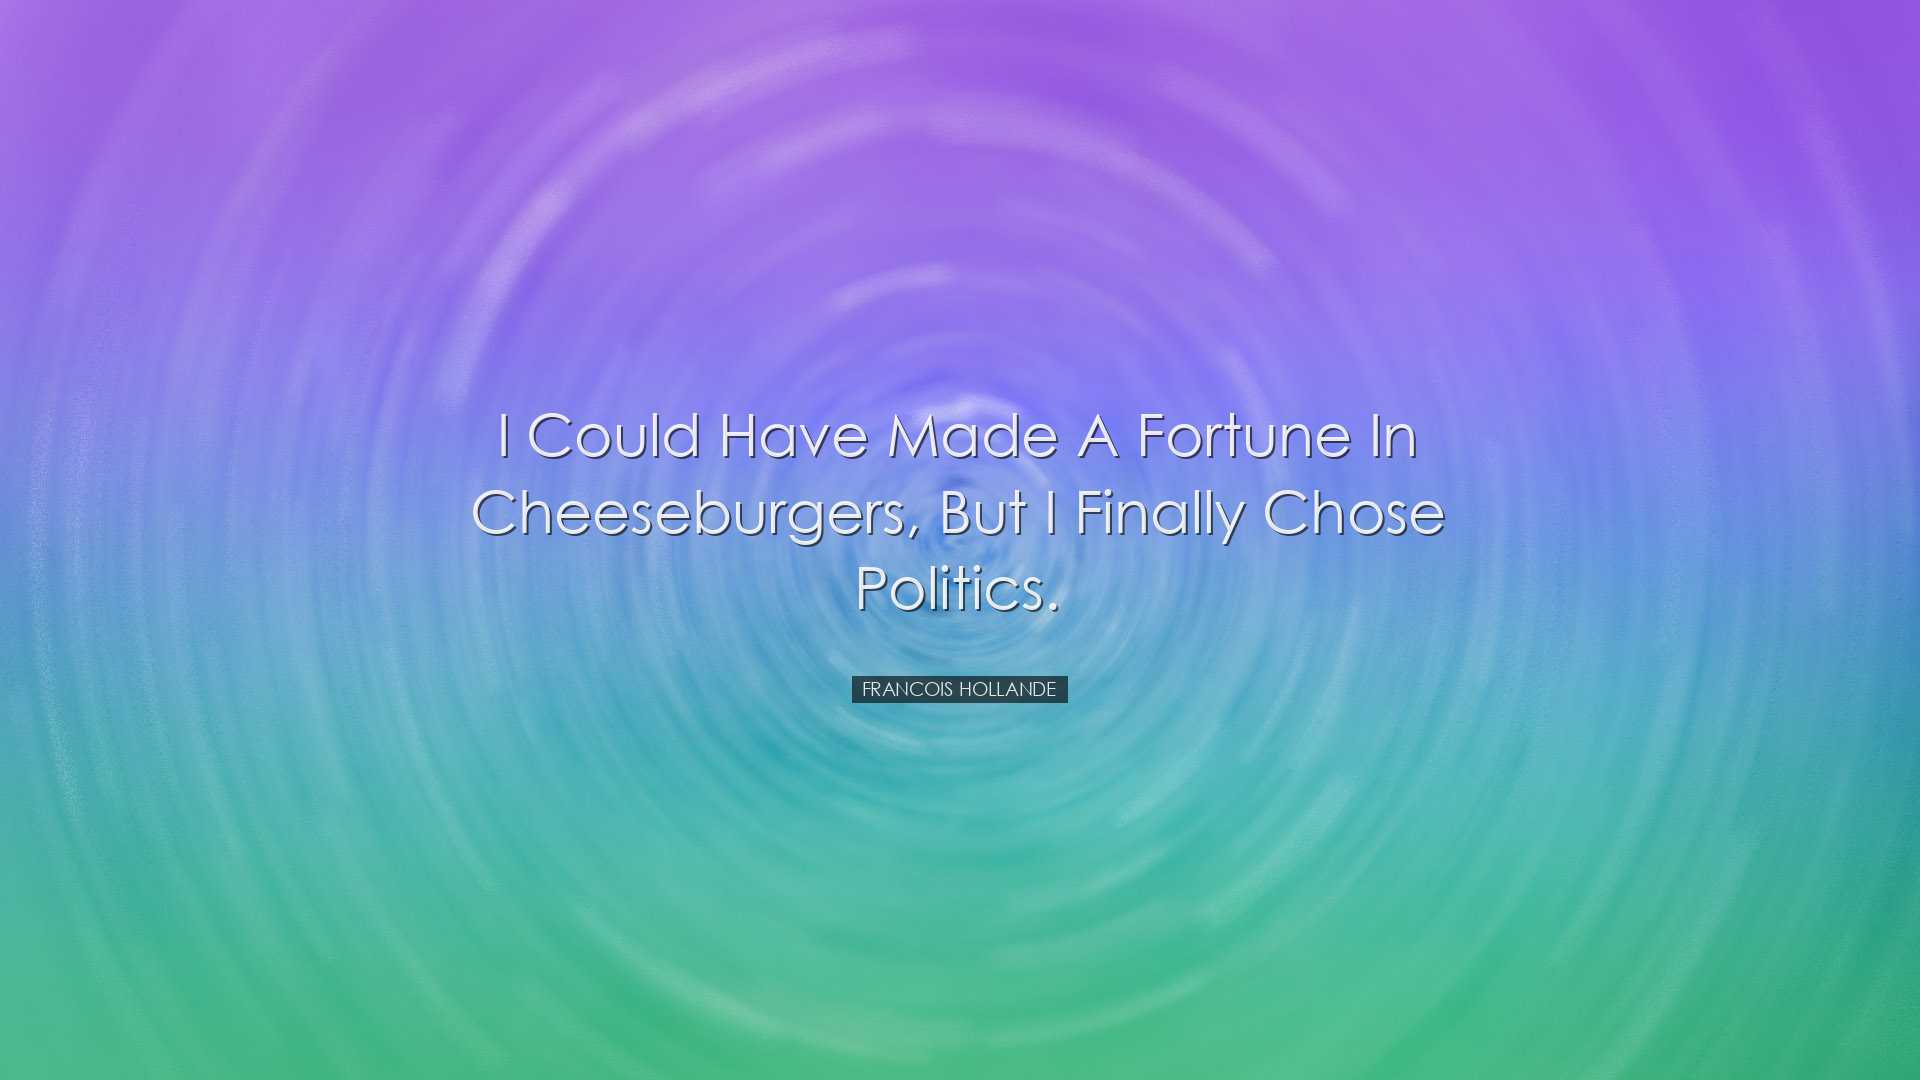 I could have made a fortune in cheeseburgers, but I finally chose